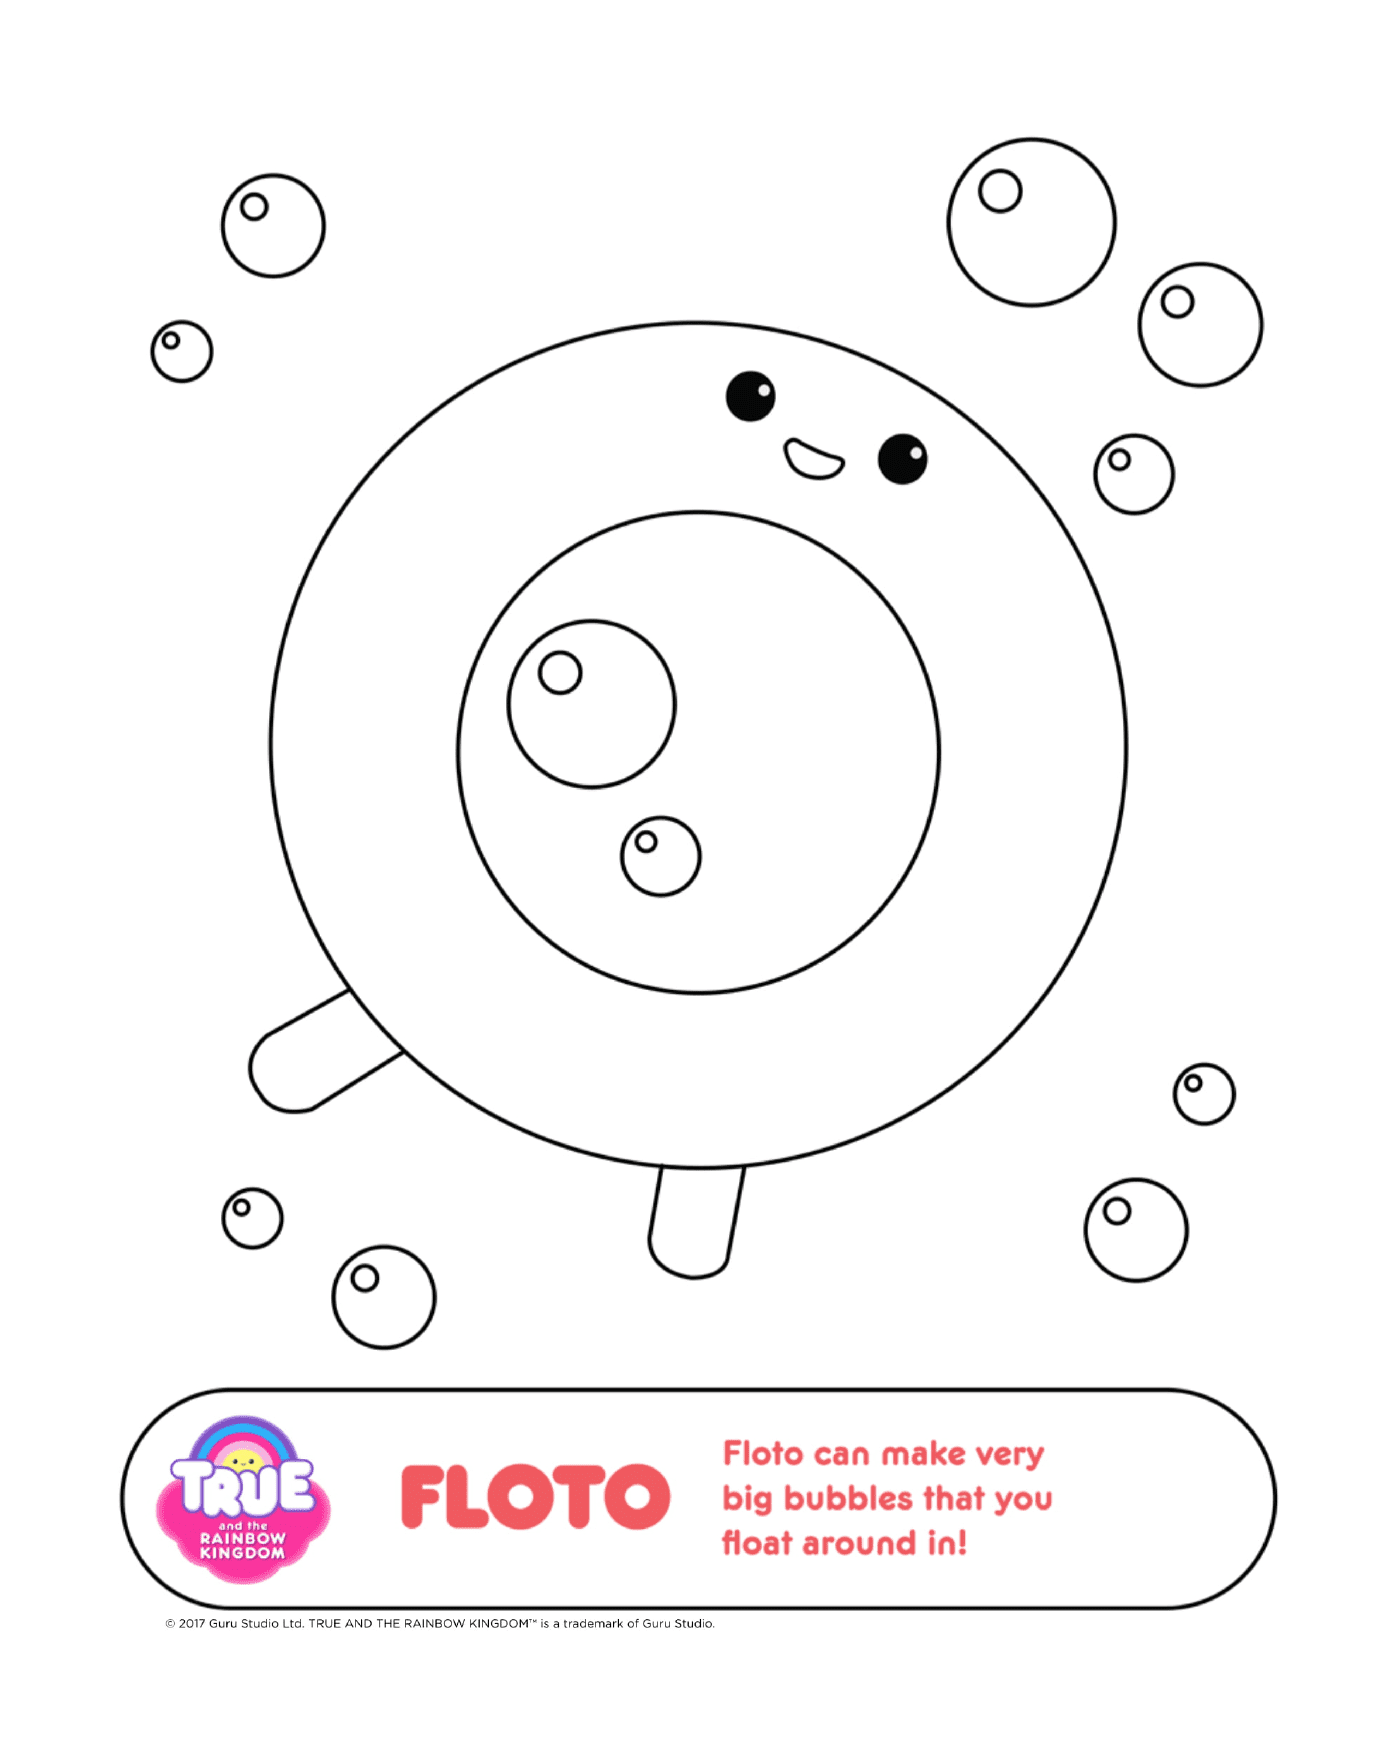  Floto, object with bubbles 